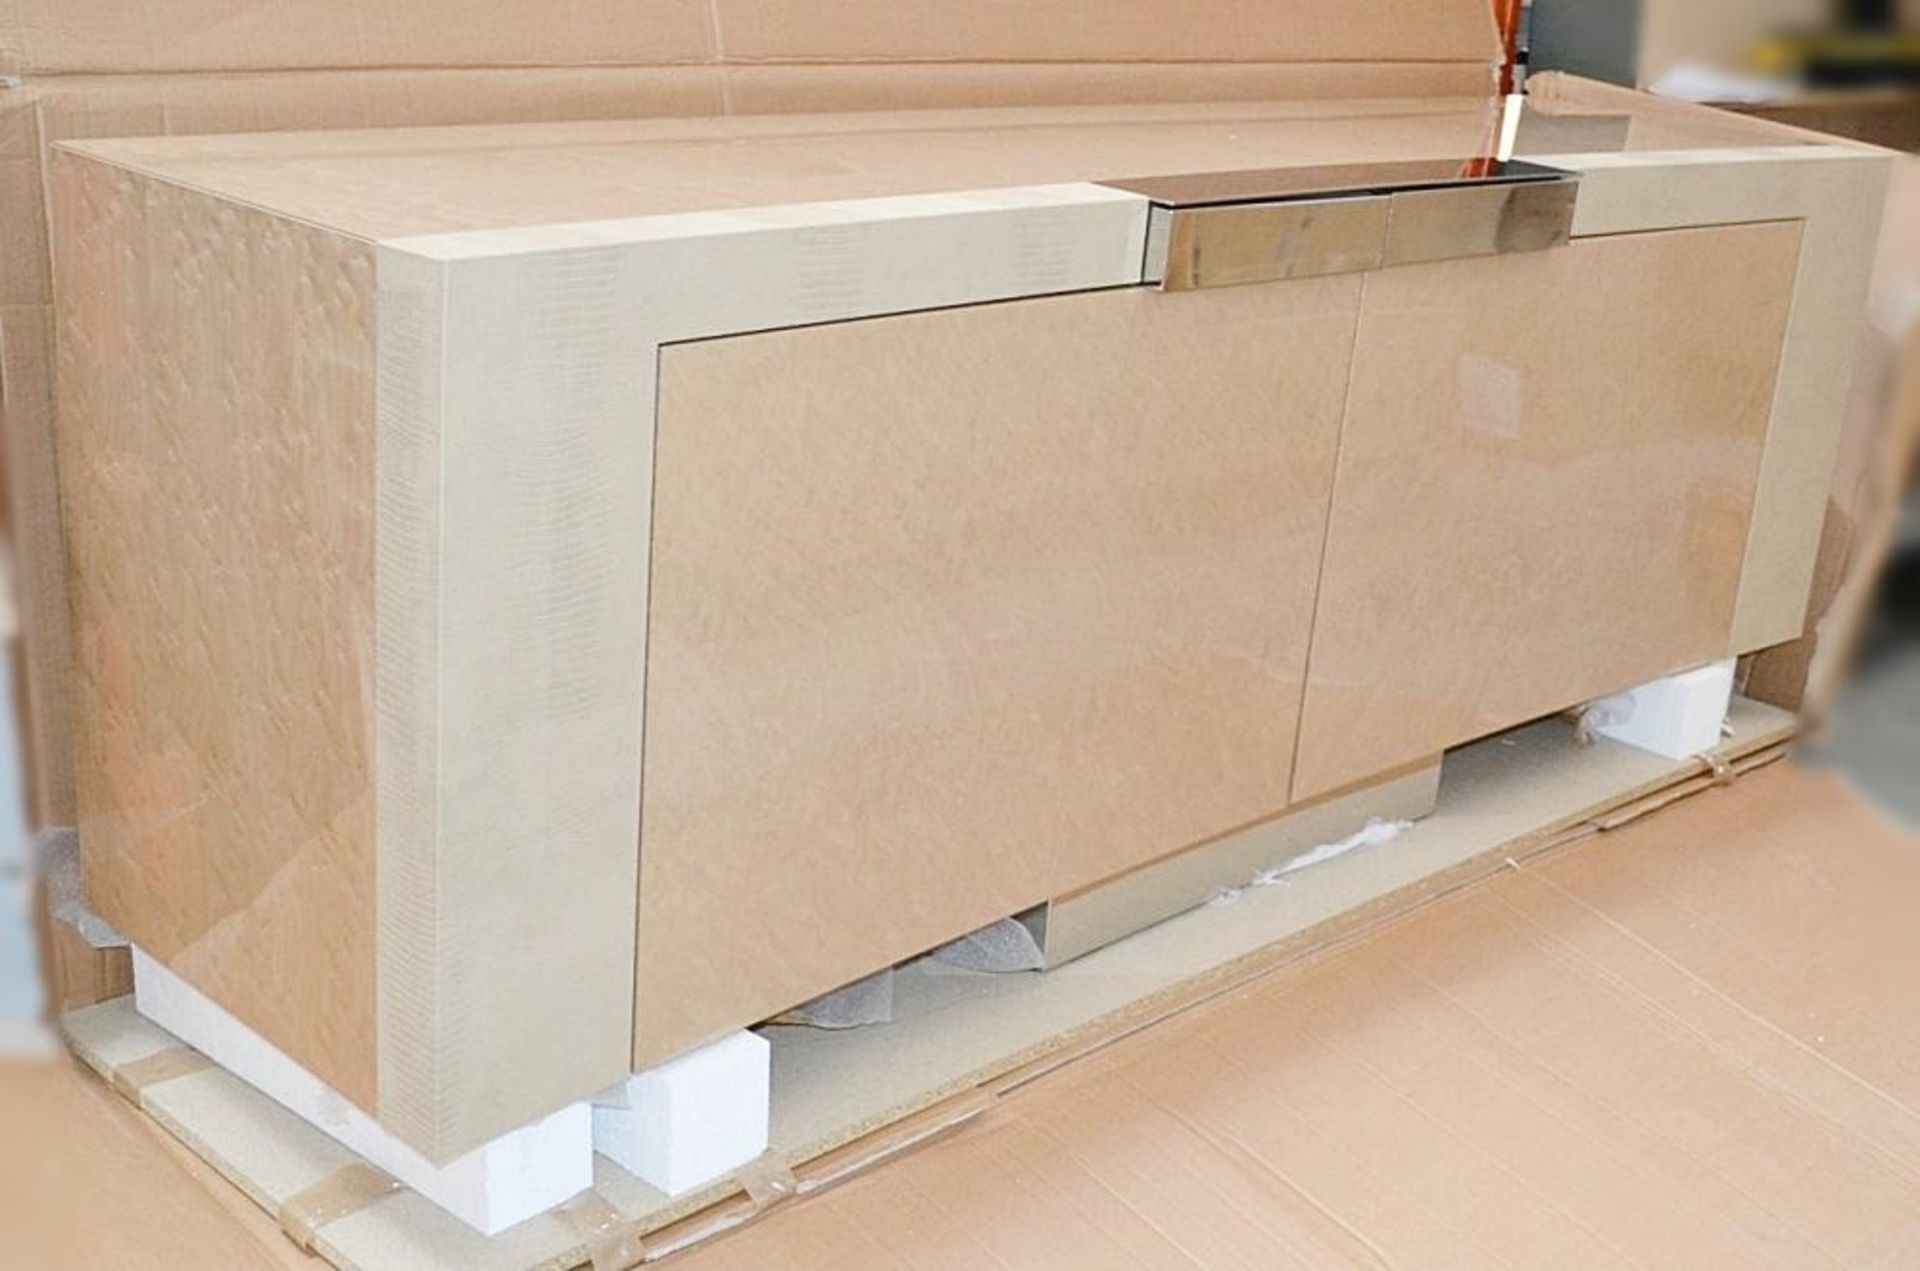 1 x GIORGIO Sunrise Contemporary 2-Door Buffet Sideboard - Dimensions: W230 x D57 x H80cm Ref: 33781 - Image 5 of 13